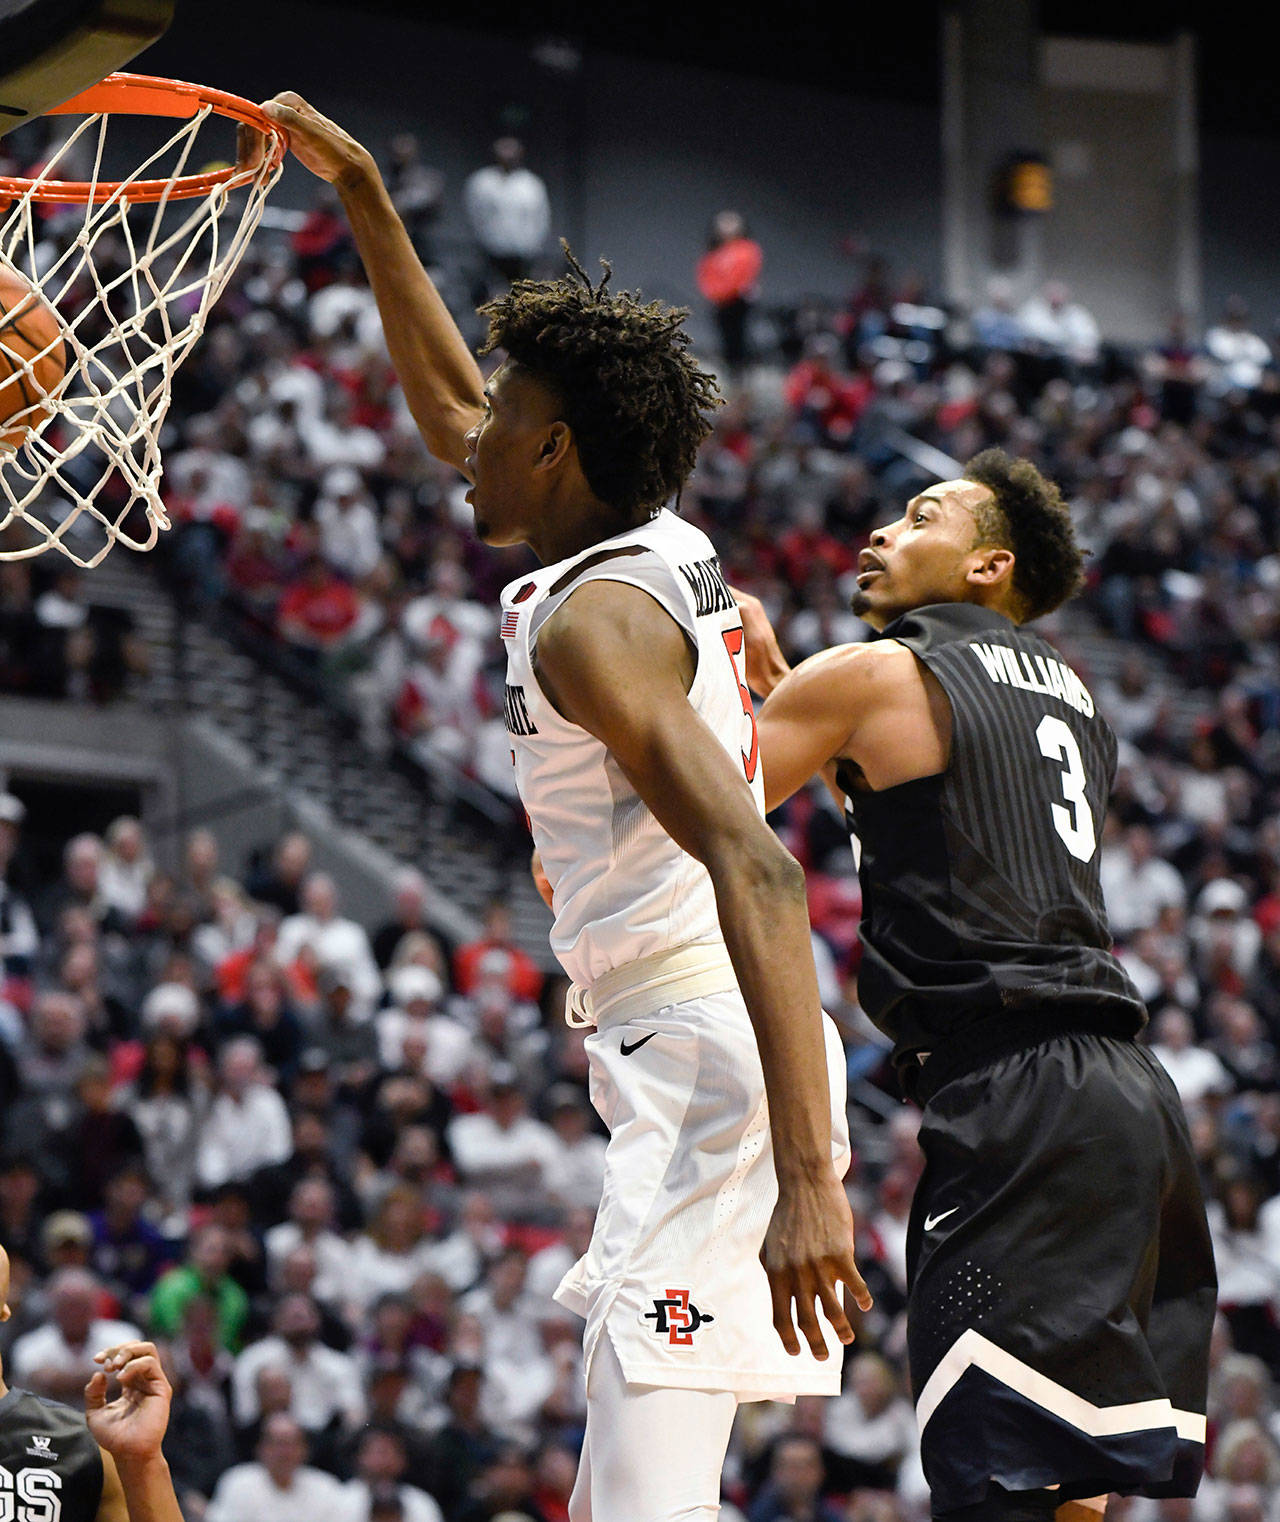 San Diego State forward Jalen McDaniels (5) tips in a rebound in front of Gonzaga forward Johnathan Williams (3) during the second half of a game Thursday in San Diego. (AP Photo/Denis Poroy)